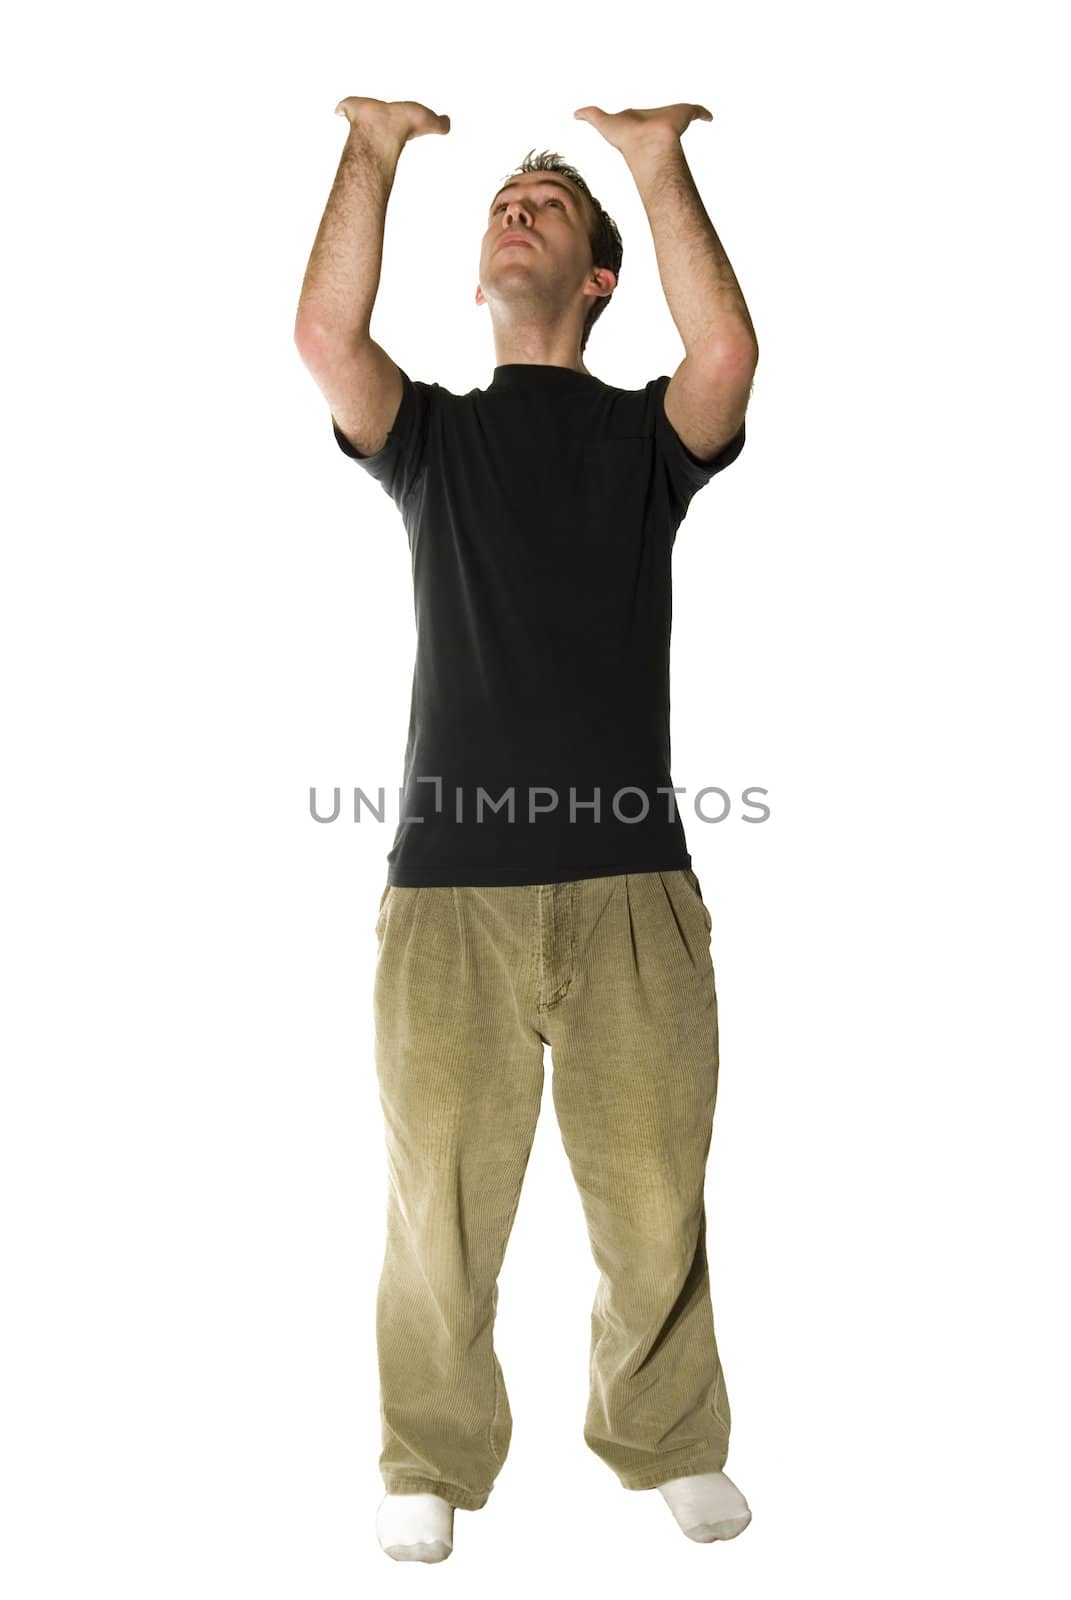 Young man wearing casual clothes, holding up your words or a sign, isolated against a white background